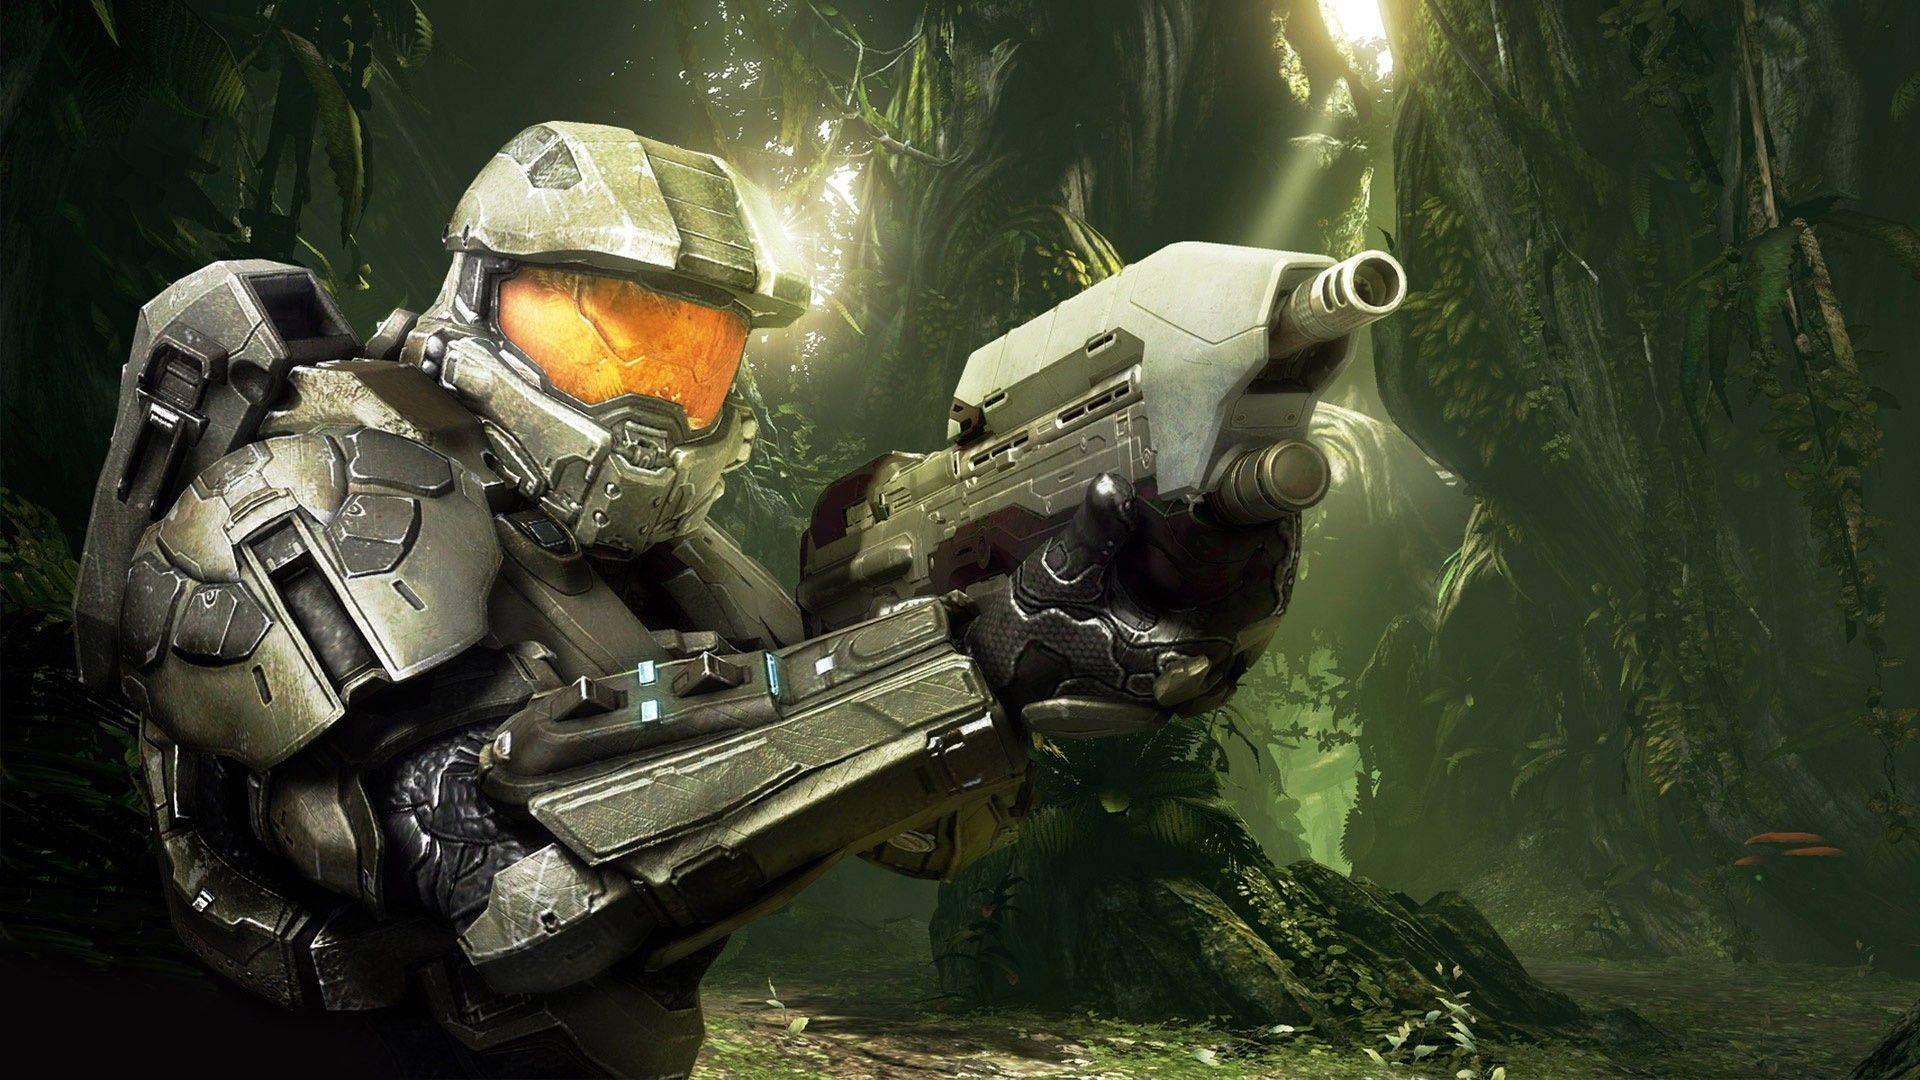 Halo 4 Mater Chief In Jungle Background